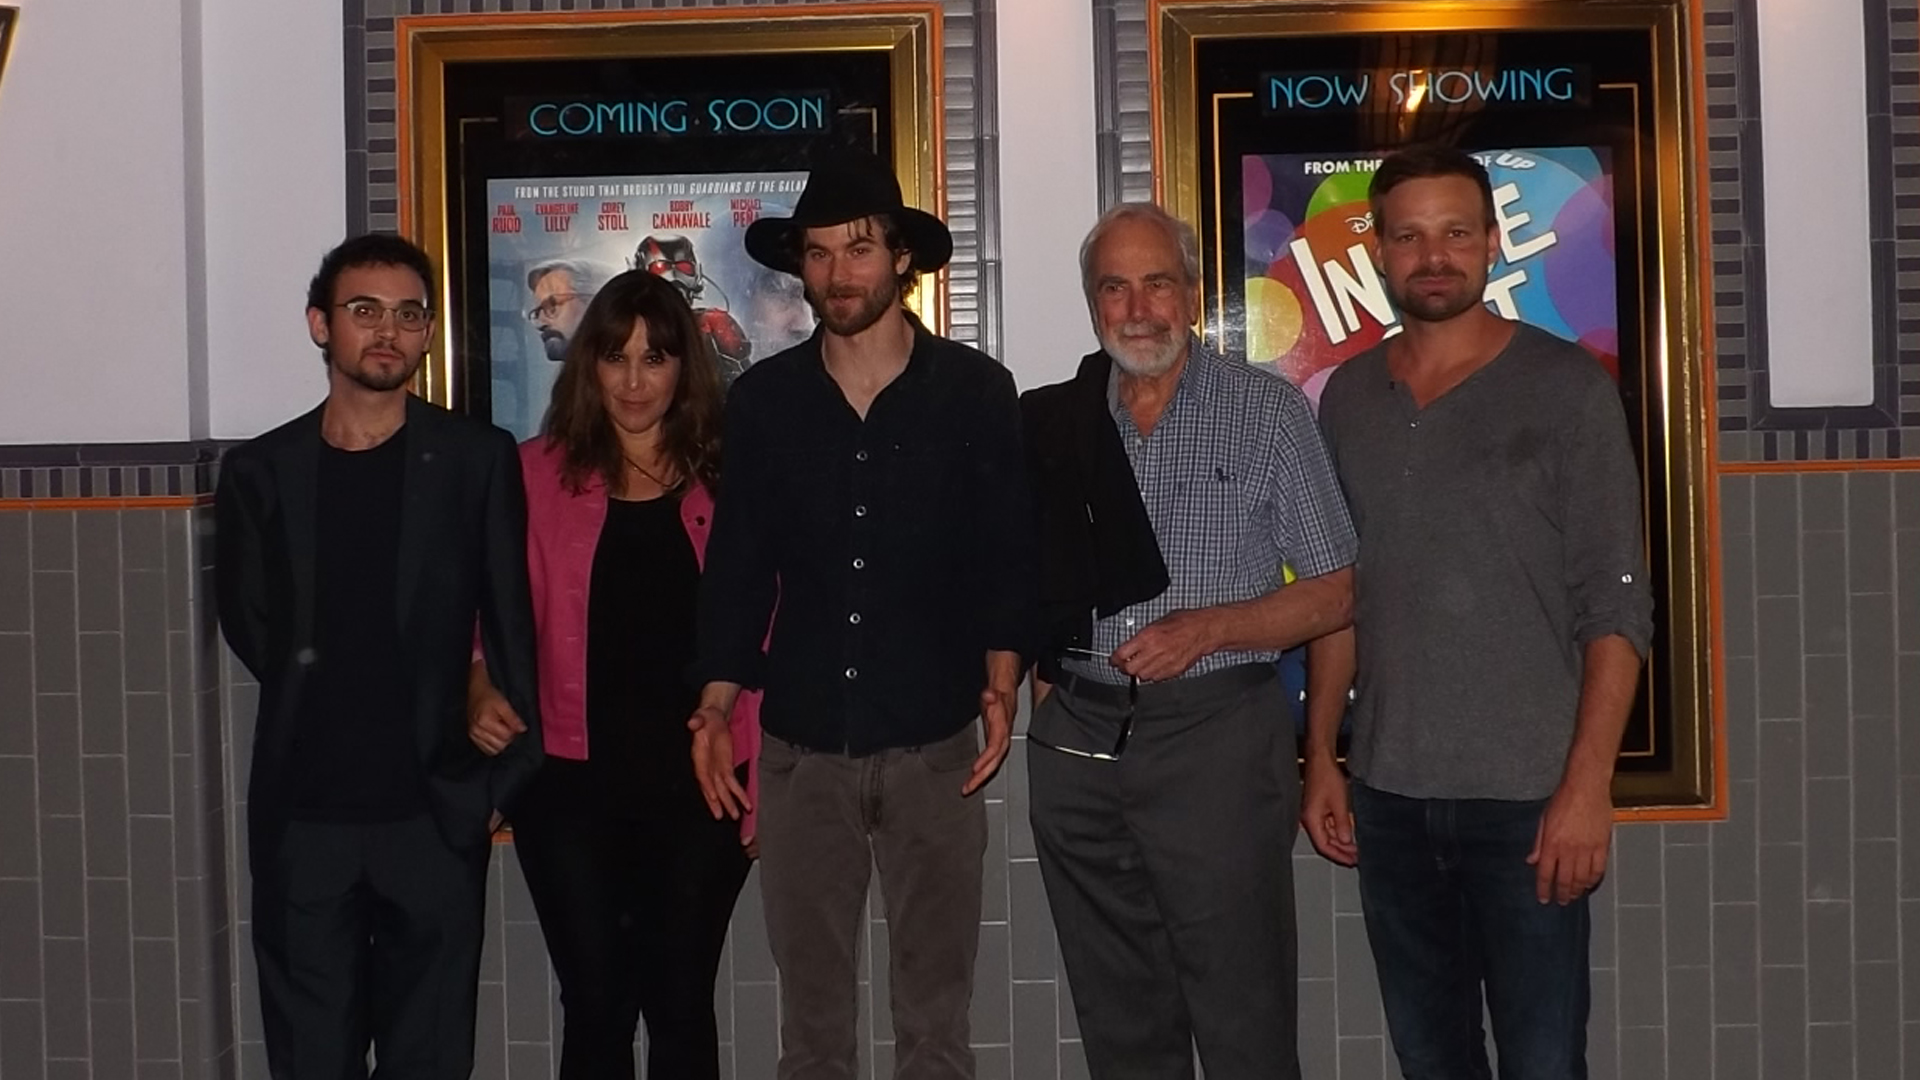 (From L to R): Ansel Faraj, Maggie Wagner, Eric Gorlow, Jerry Lacy, and Nathan Wilson at THE LAST CASE OF AUGUST T. HARRISON screening